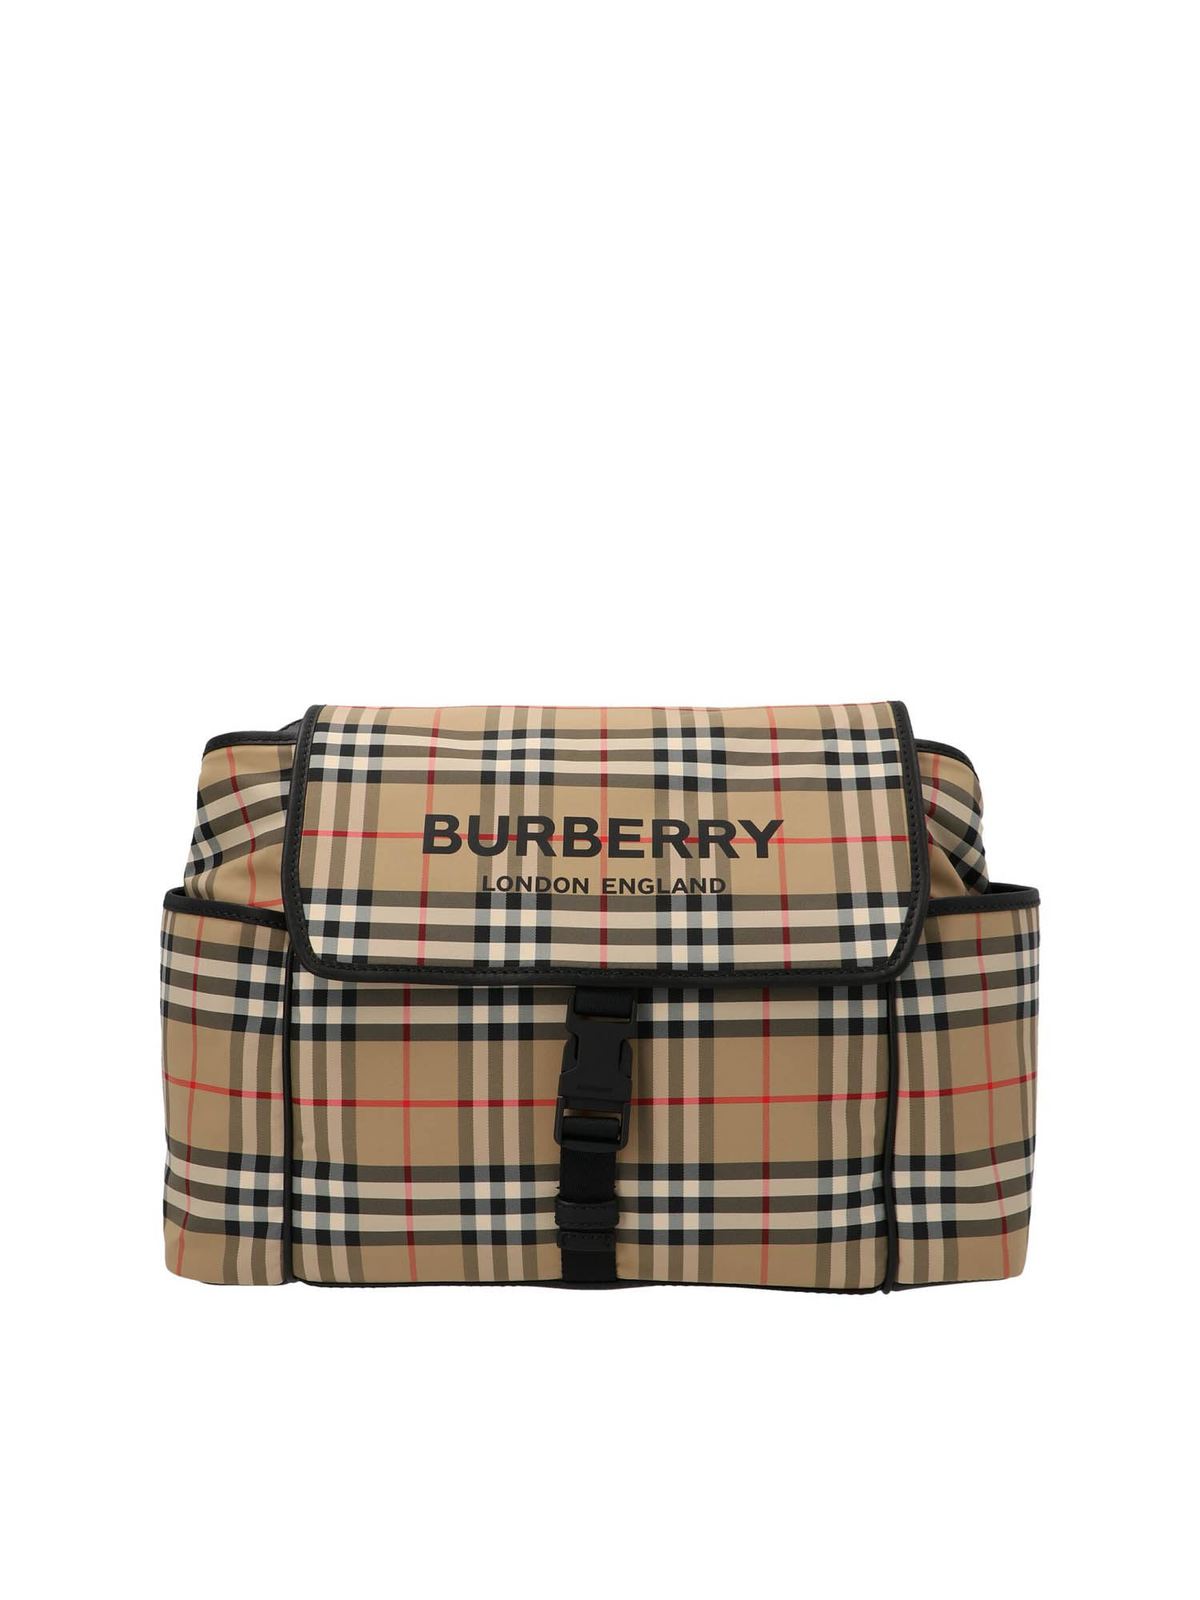 Burberry Kids' Vintage Check Changing Bag In Beige | ModeSens